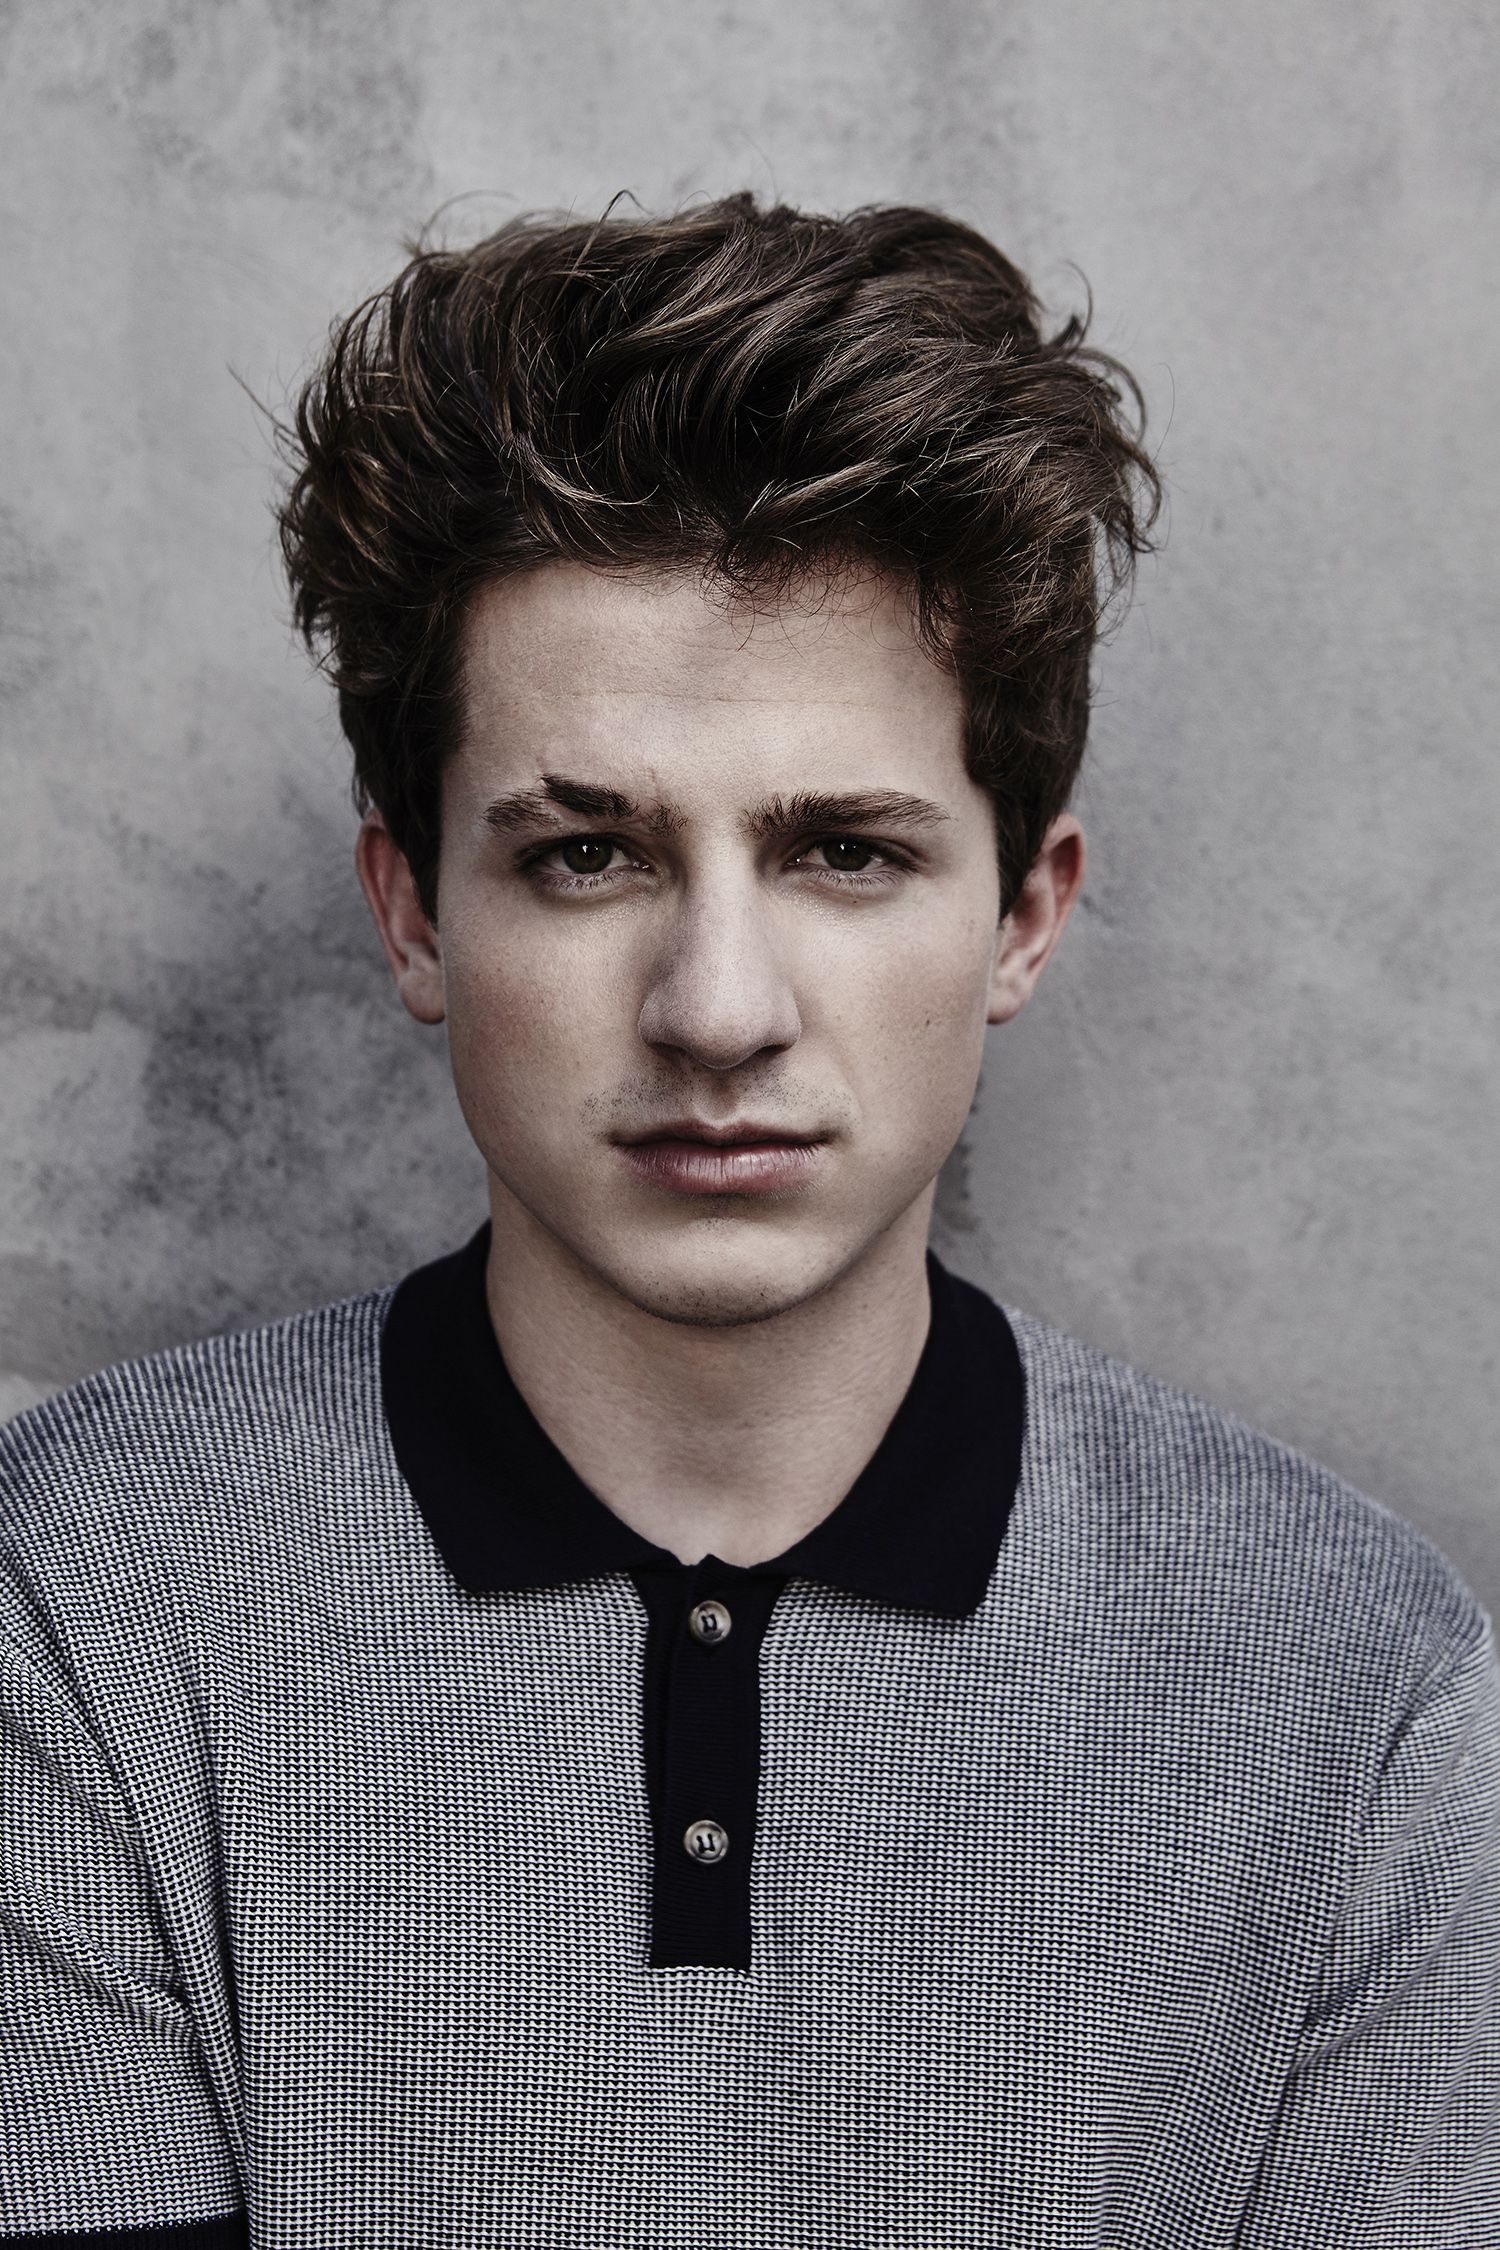 Charlie Puth: “We Don't Talk Anymore” featuring Selena Gomez, Hit single. 1500x2250 HD Wallpaper.